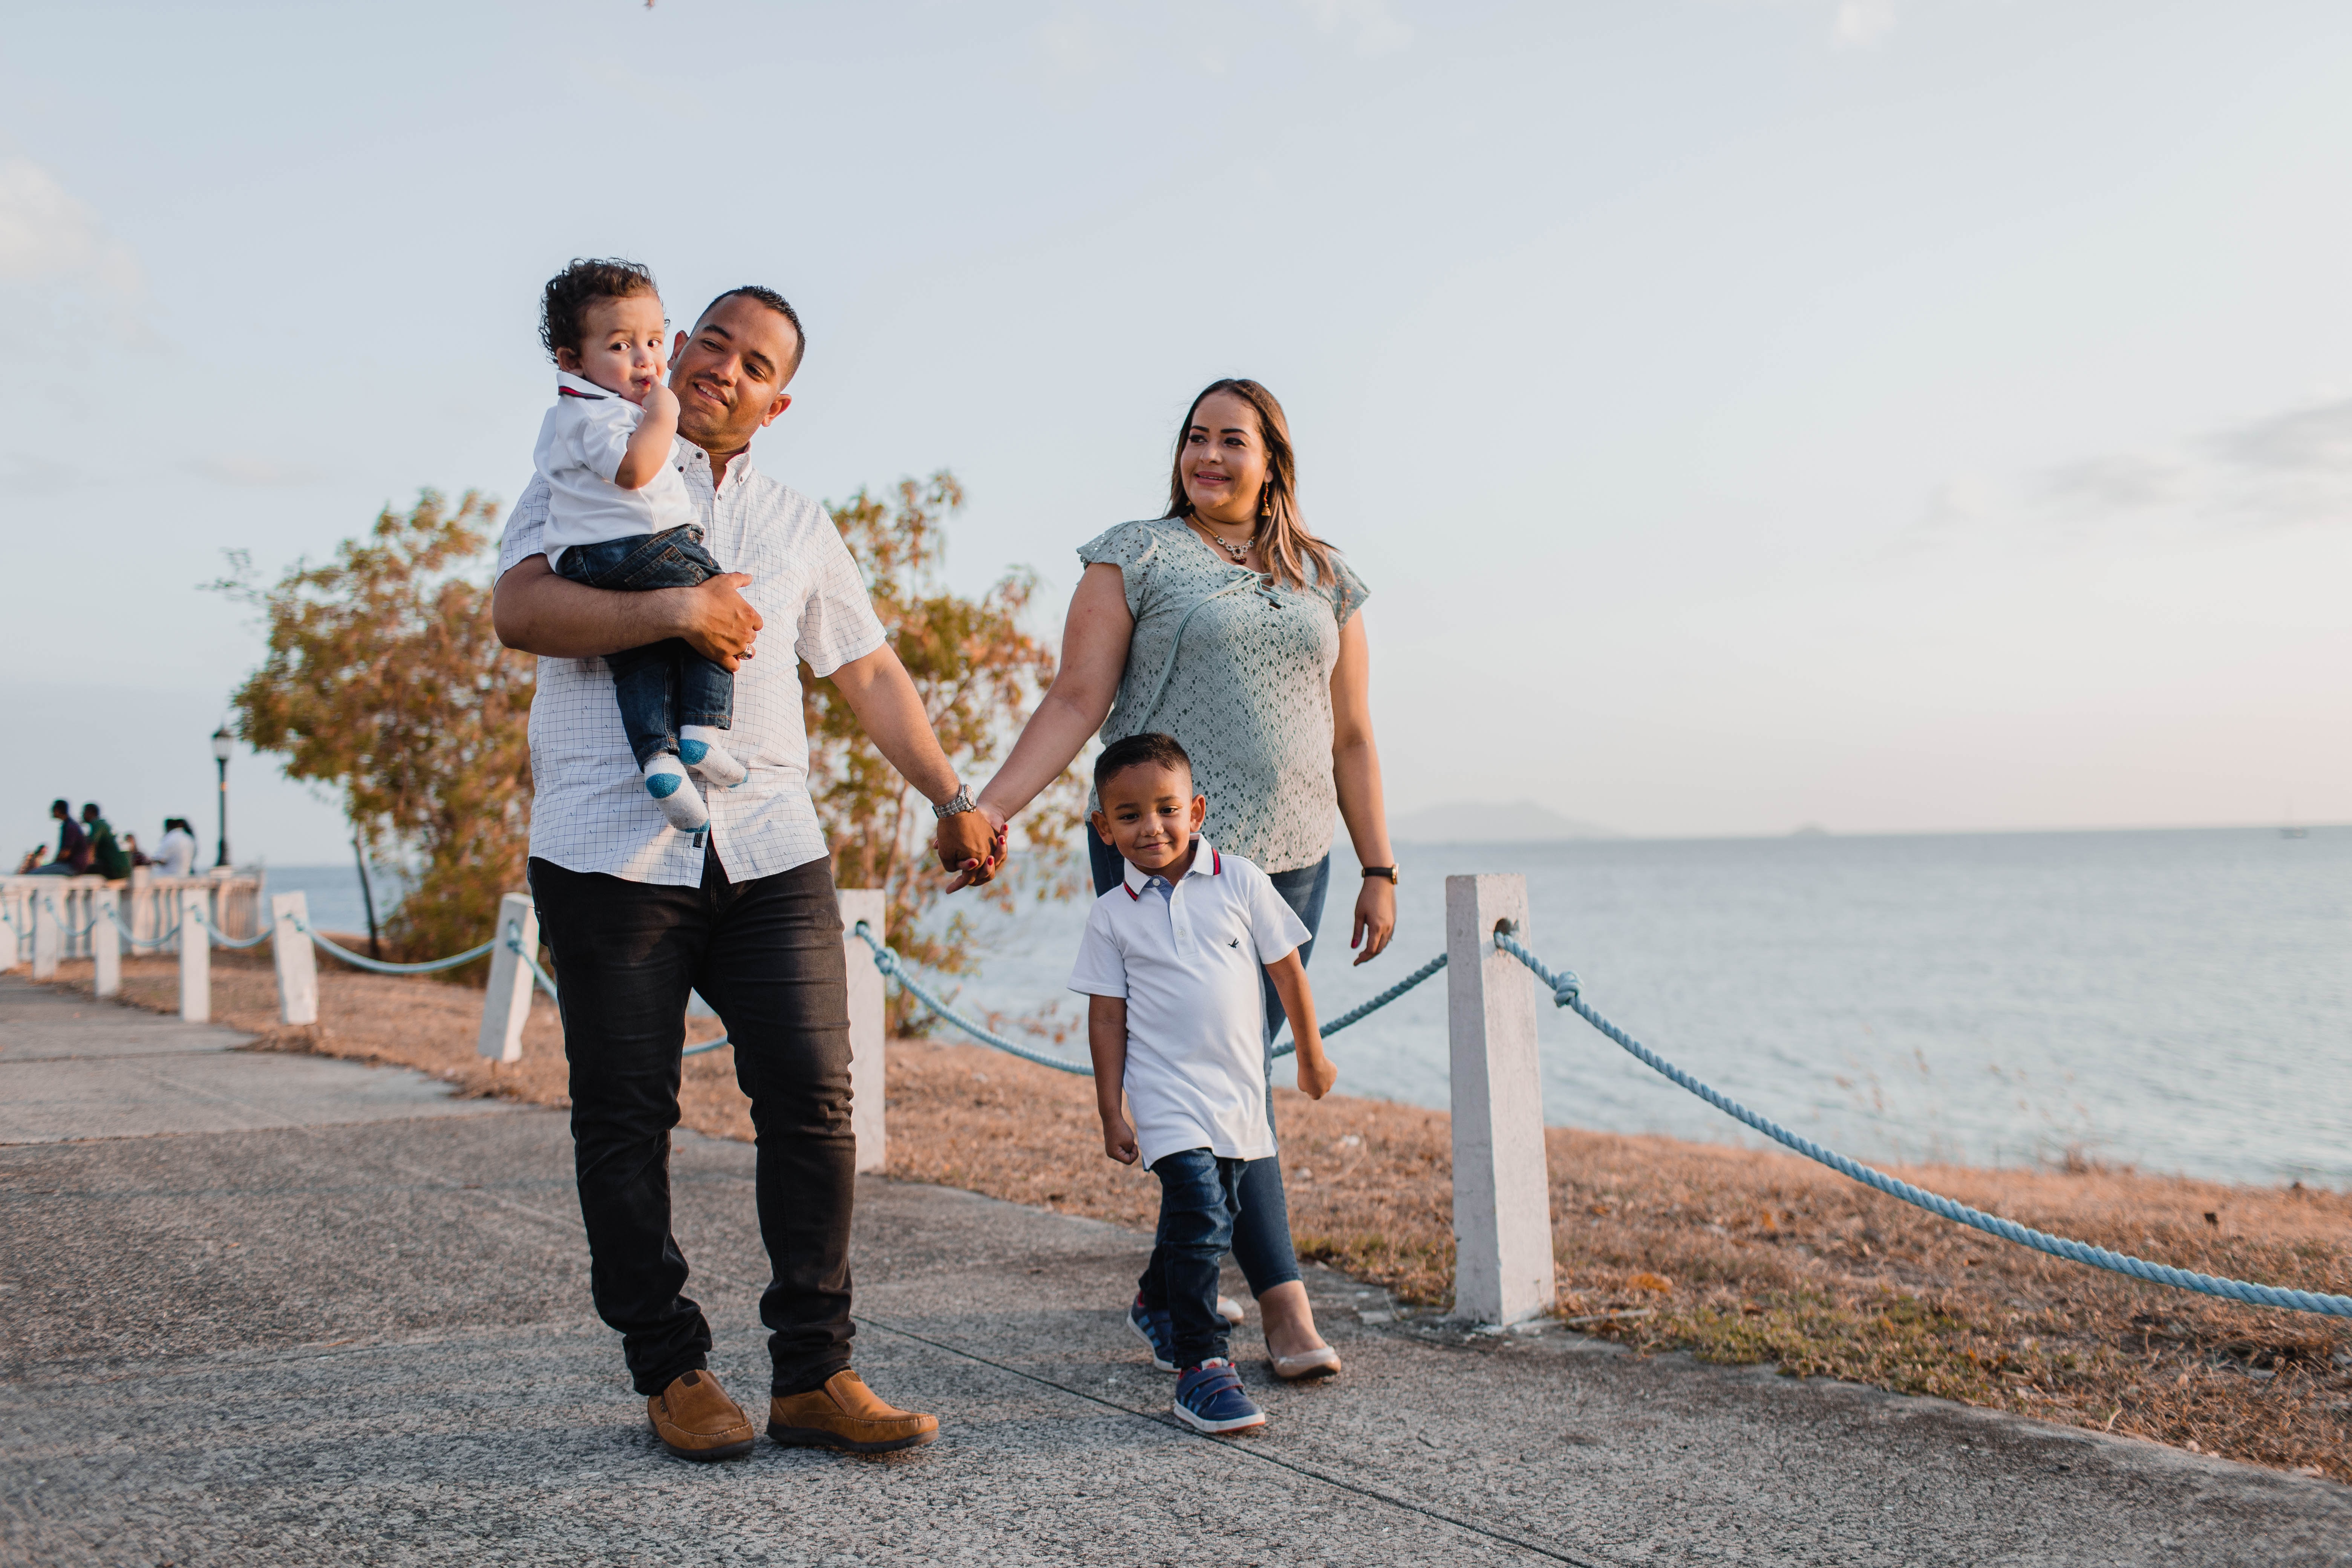 family of 4 walking by ocean | medical malpractice attorney